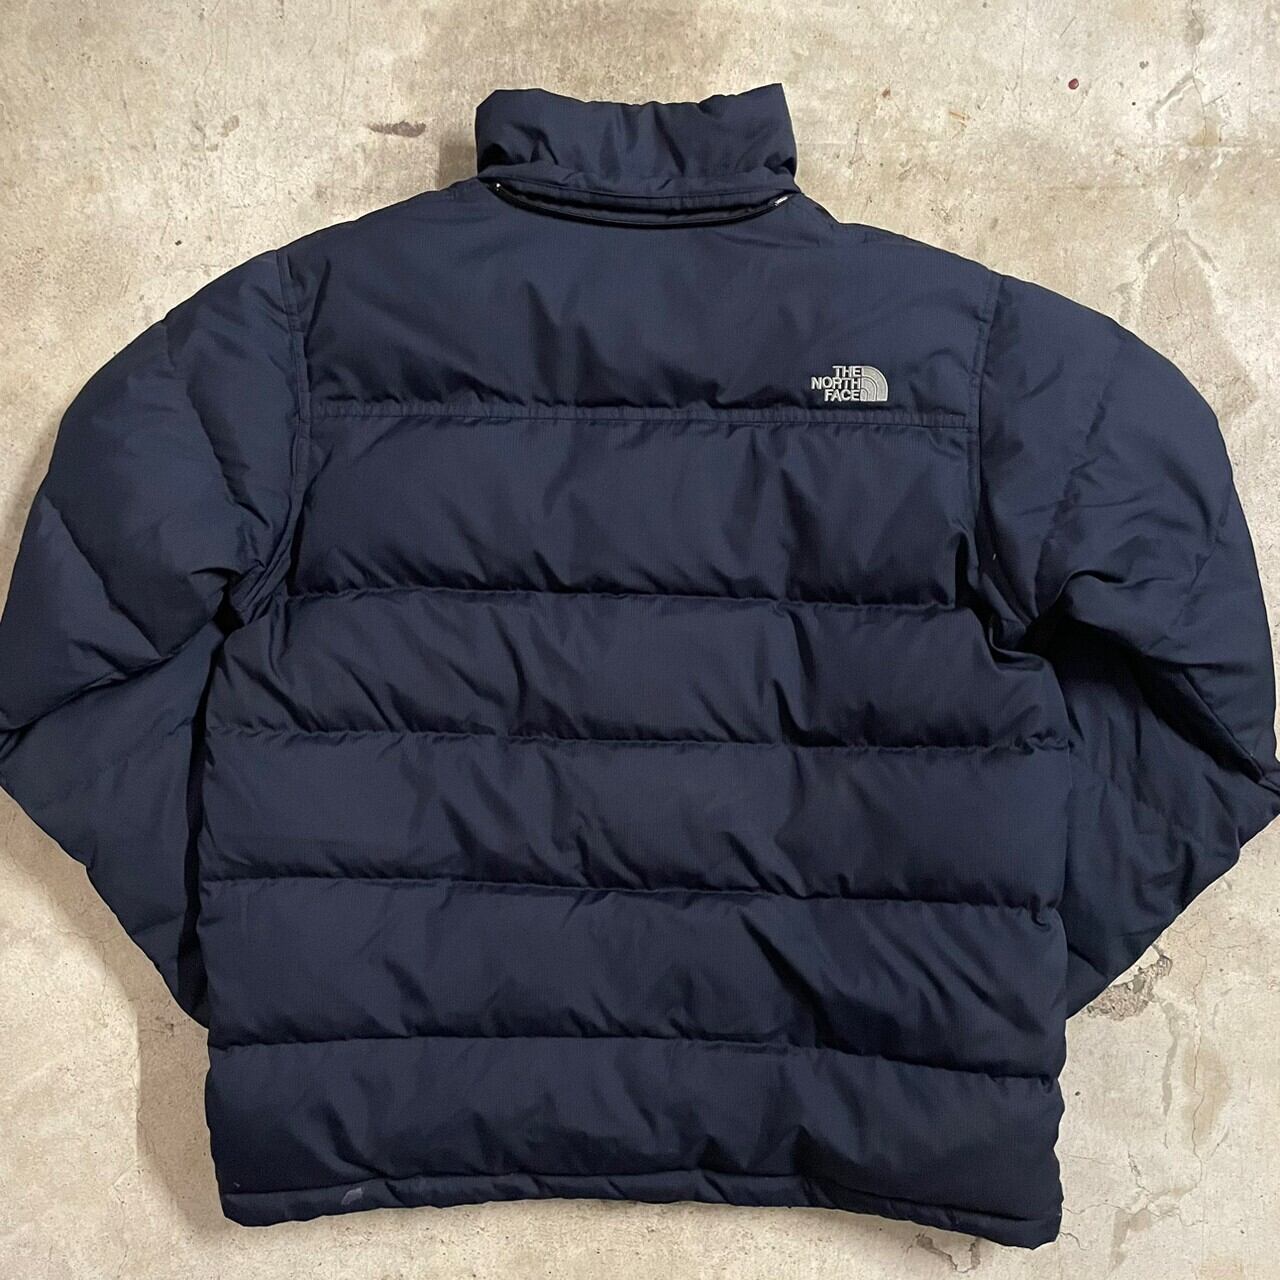 【THE NORTH FACE】logo embroidery 900 fill power down jacket/ザ・ノースフェイス ロゴ刺繍  900フィルパワー ダウンジャケット/xlsize/#0719/osaka | 〚ETON_VINTAGE〛 powered by BASE